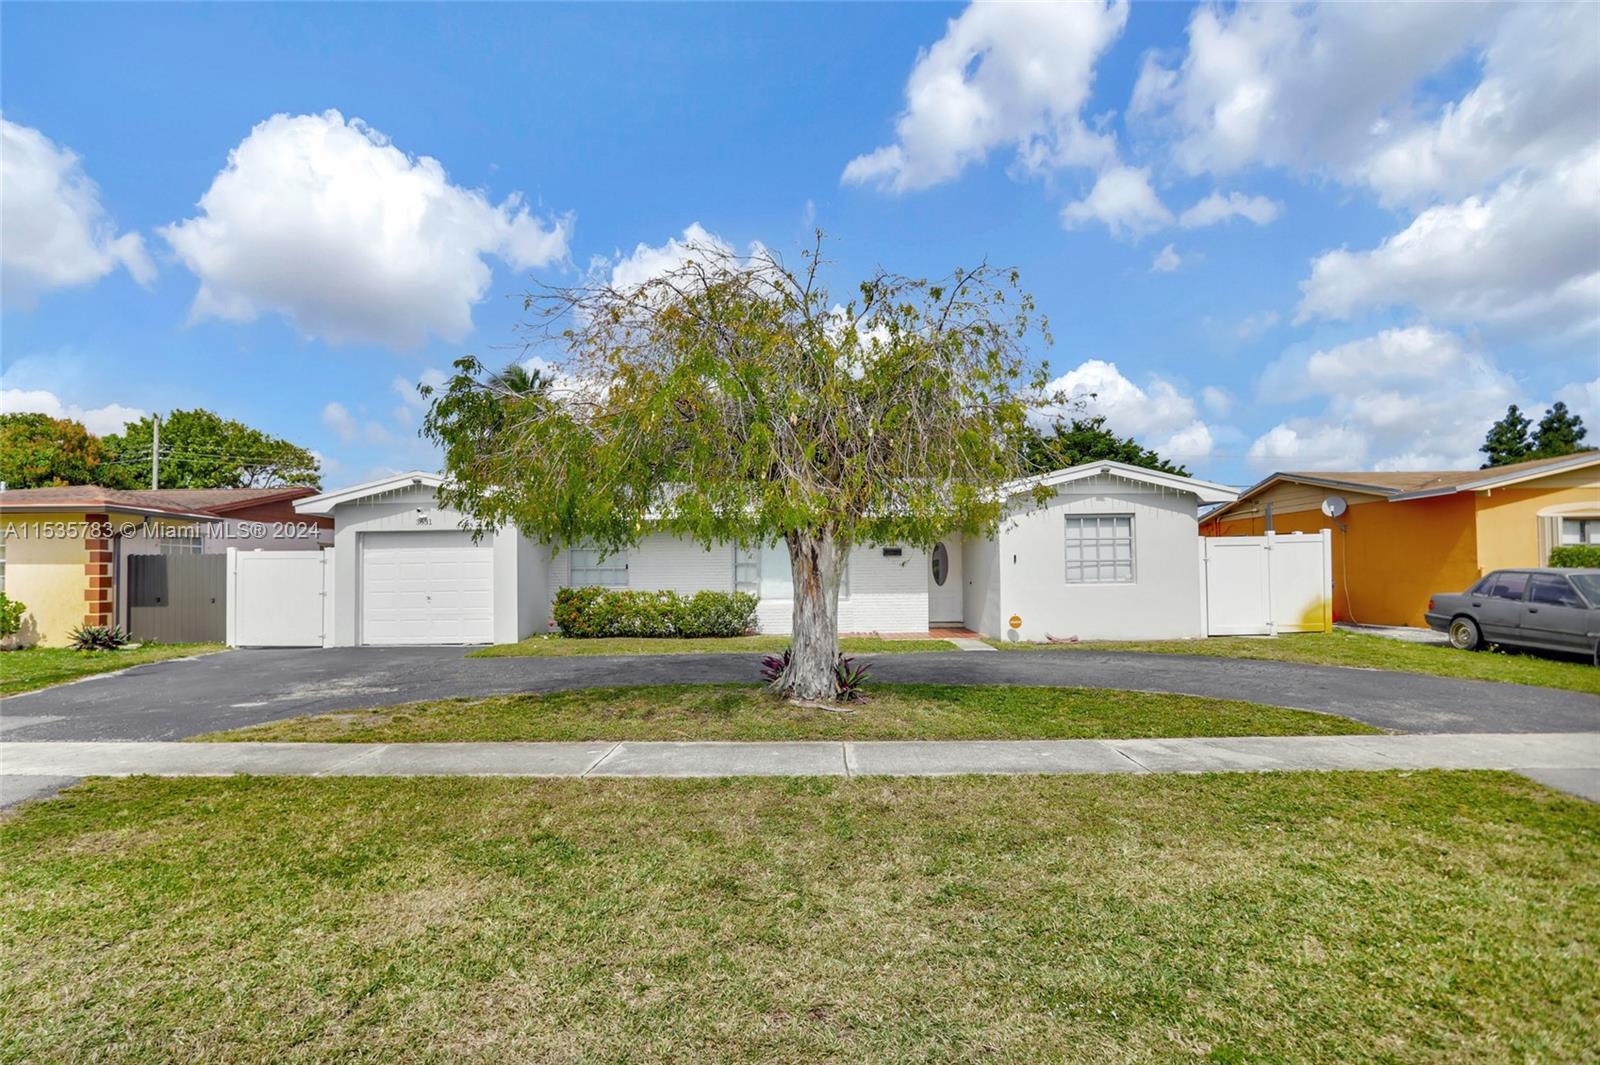 Photo of 3631 NW 28th St in Lauderdale Lakes, FL